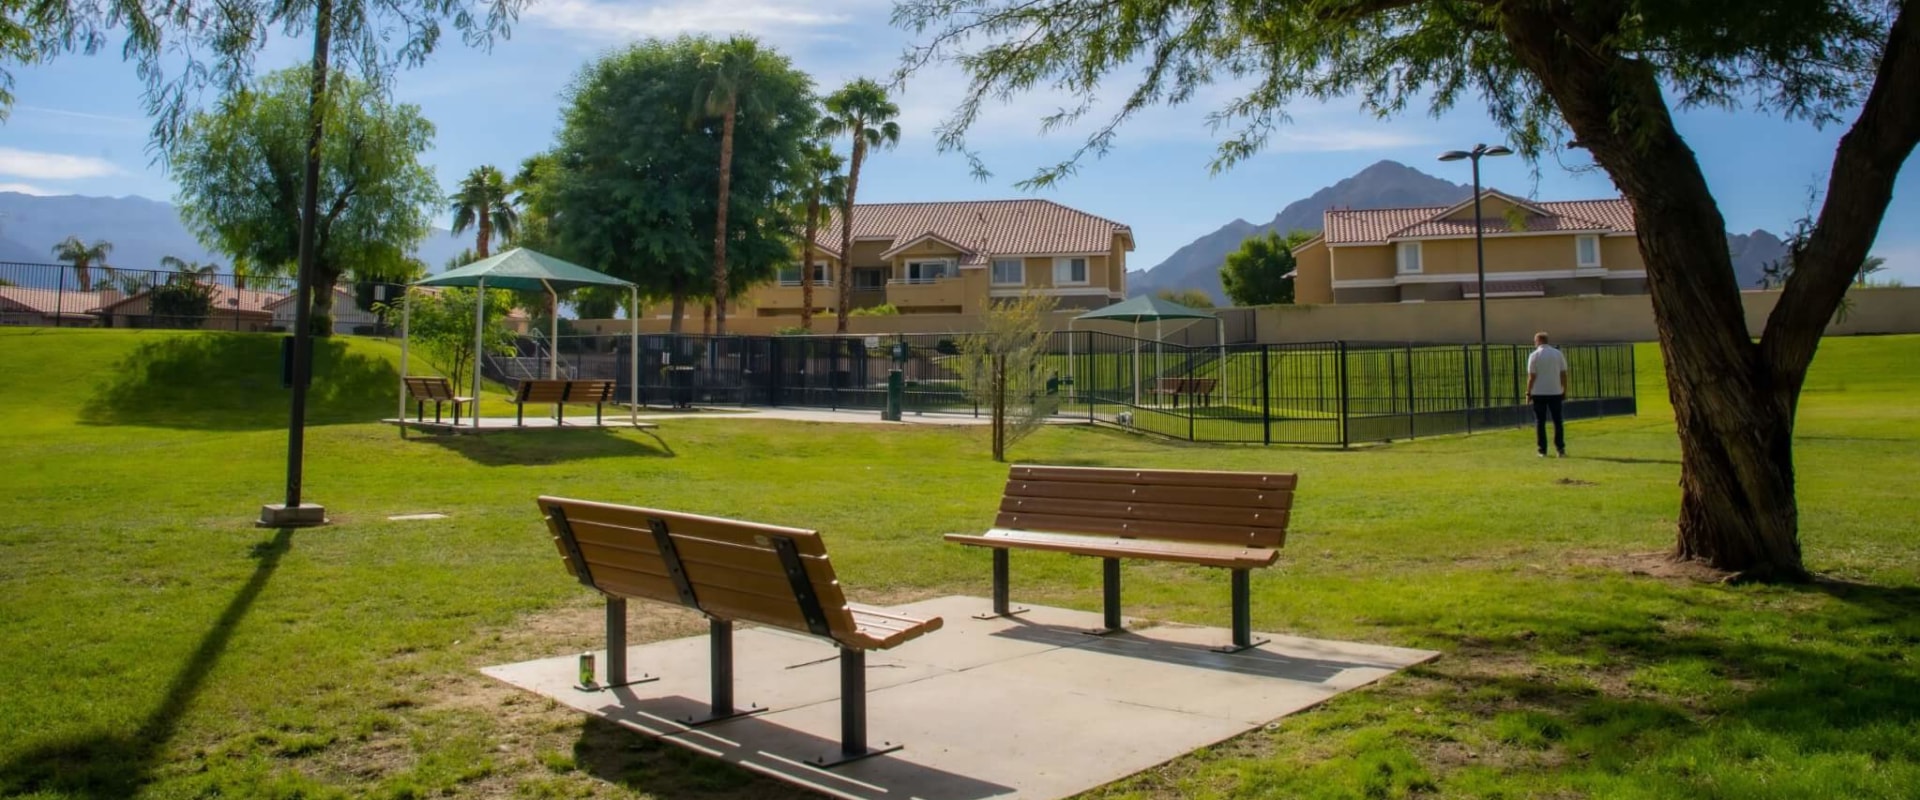 The Pet Policy in the Coachella Valley Wellness Recreation Program